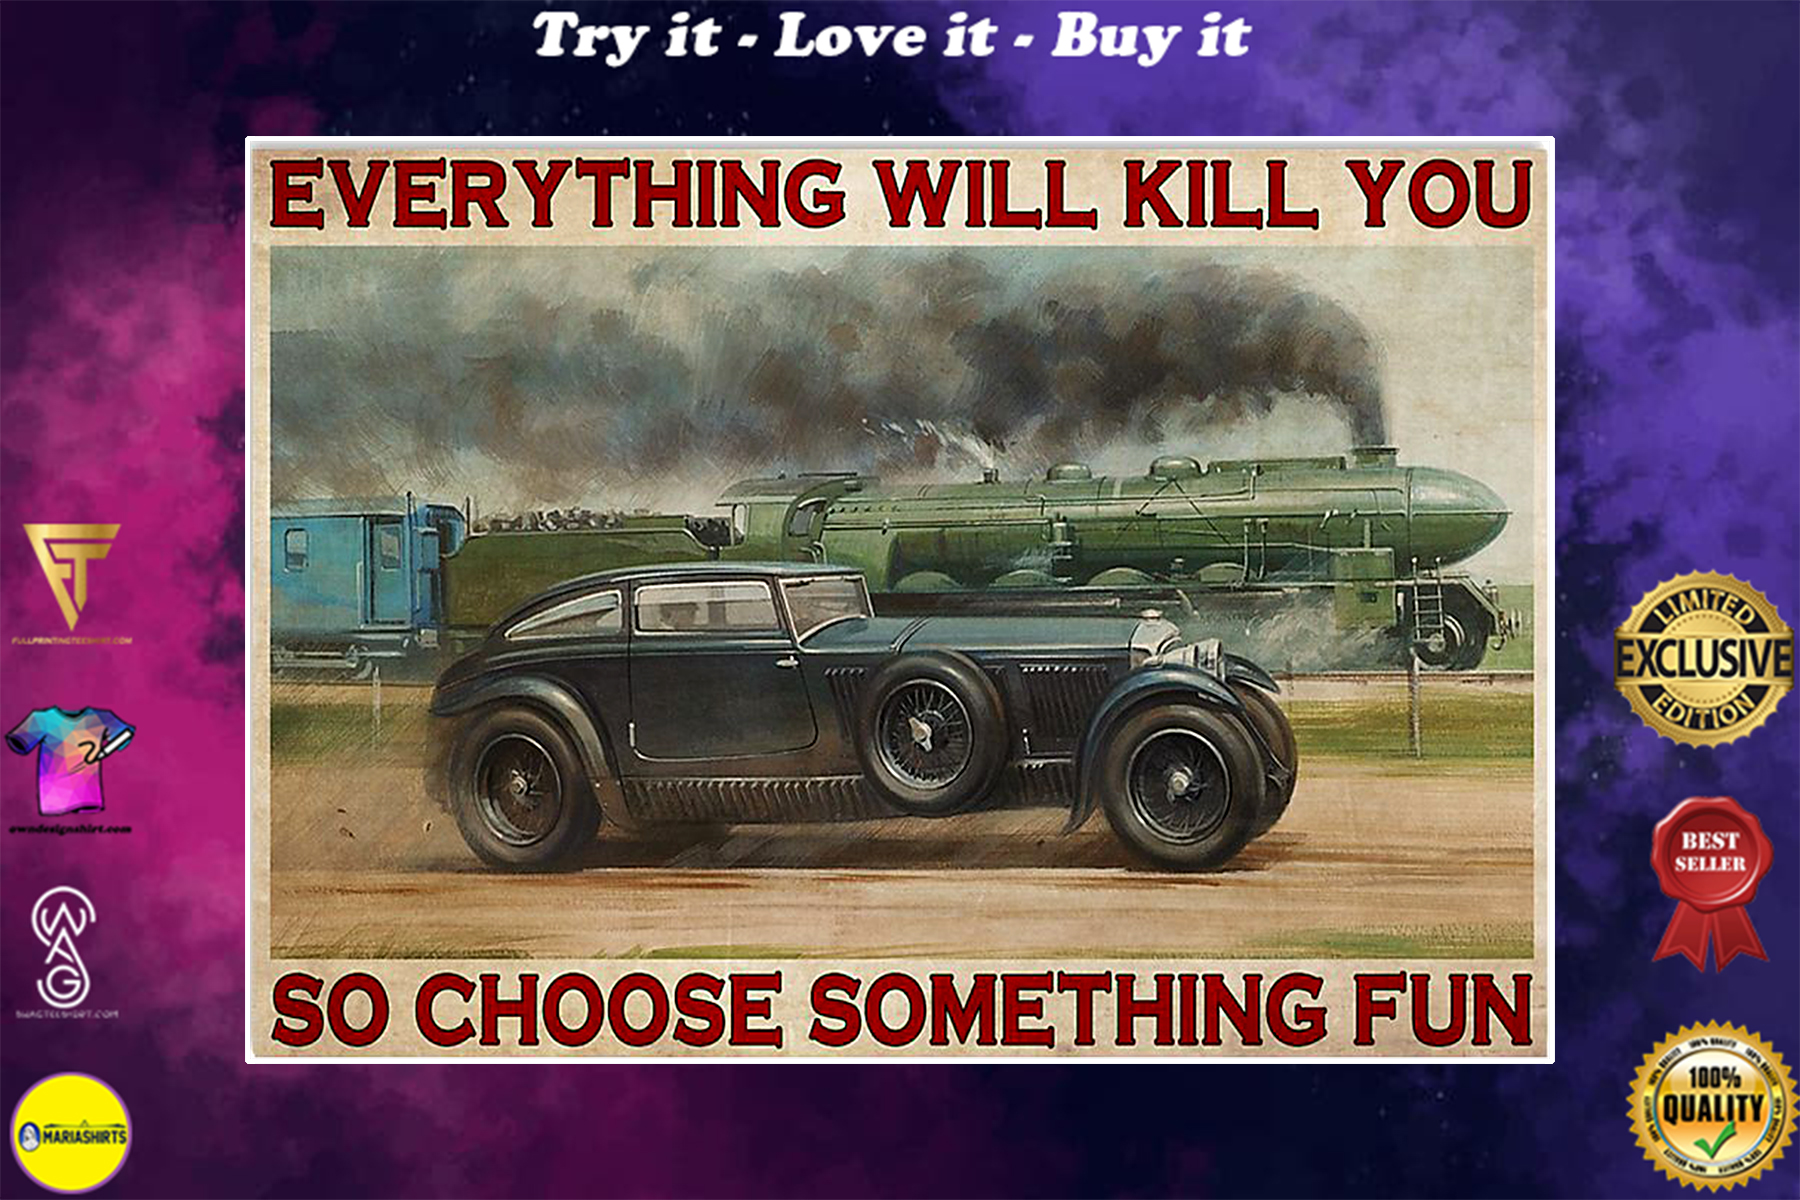 everything will kill you so choose something fun blue train vintage poster